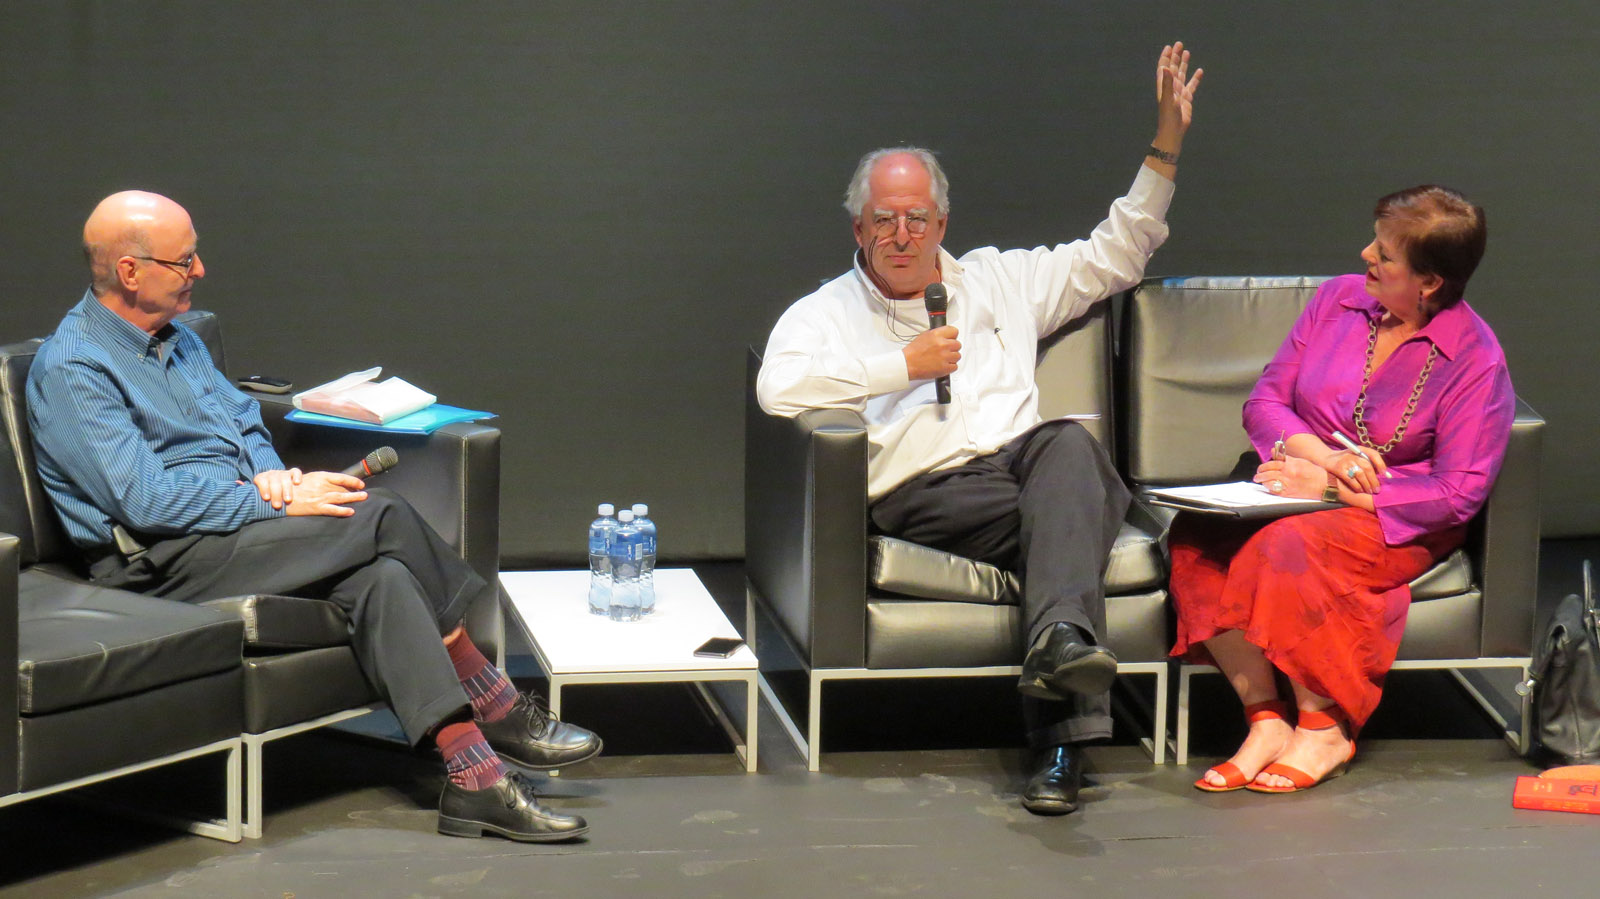 Click the image for a view of: Jack Ginsberg and William Kentridge in Conversation. Sunday 26 March